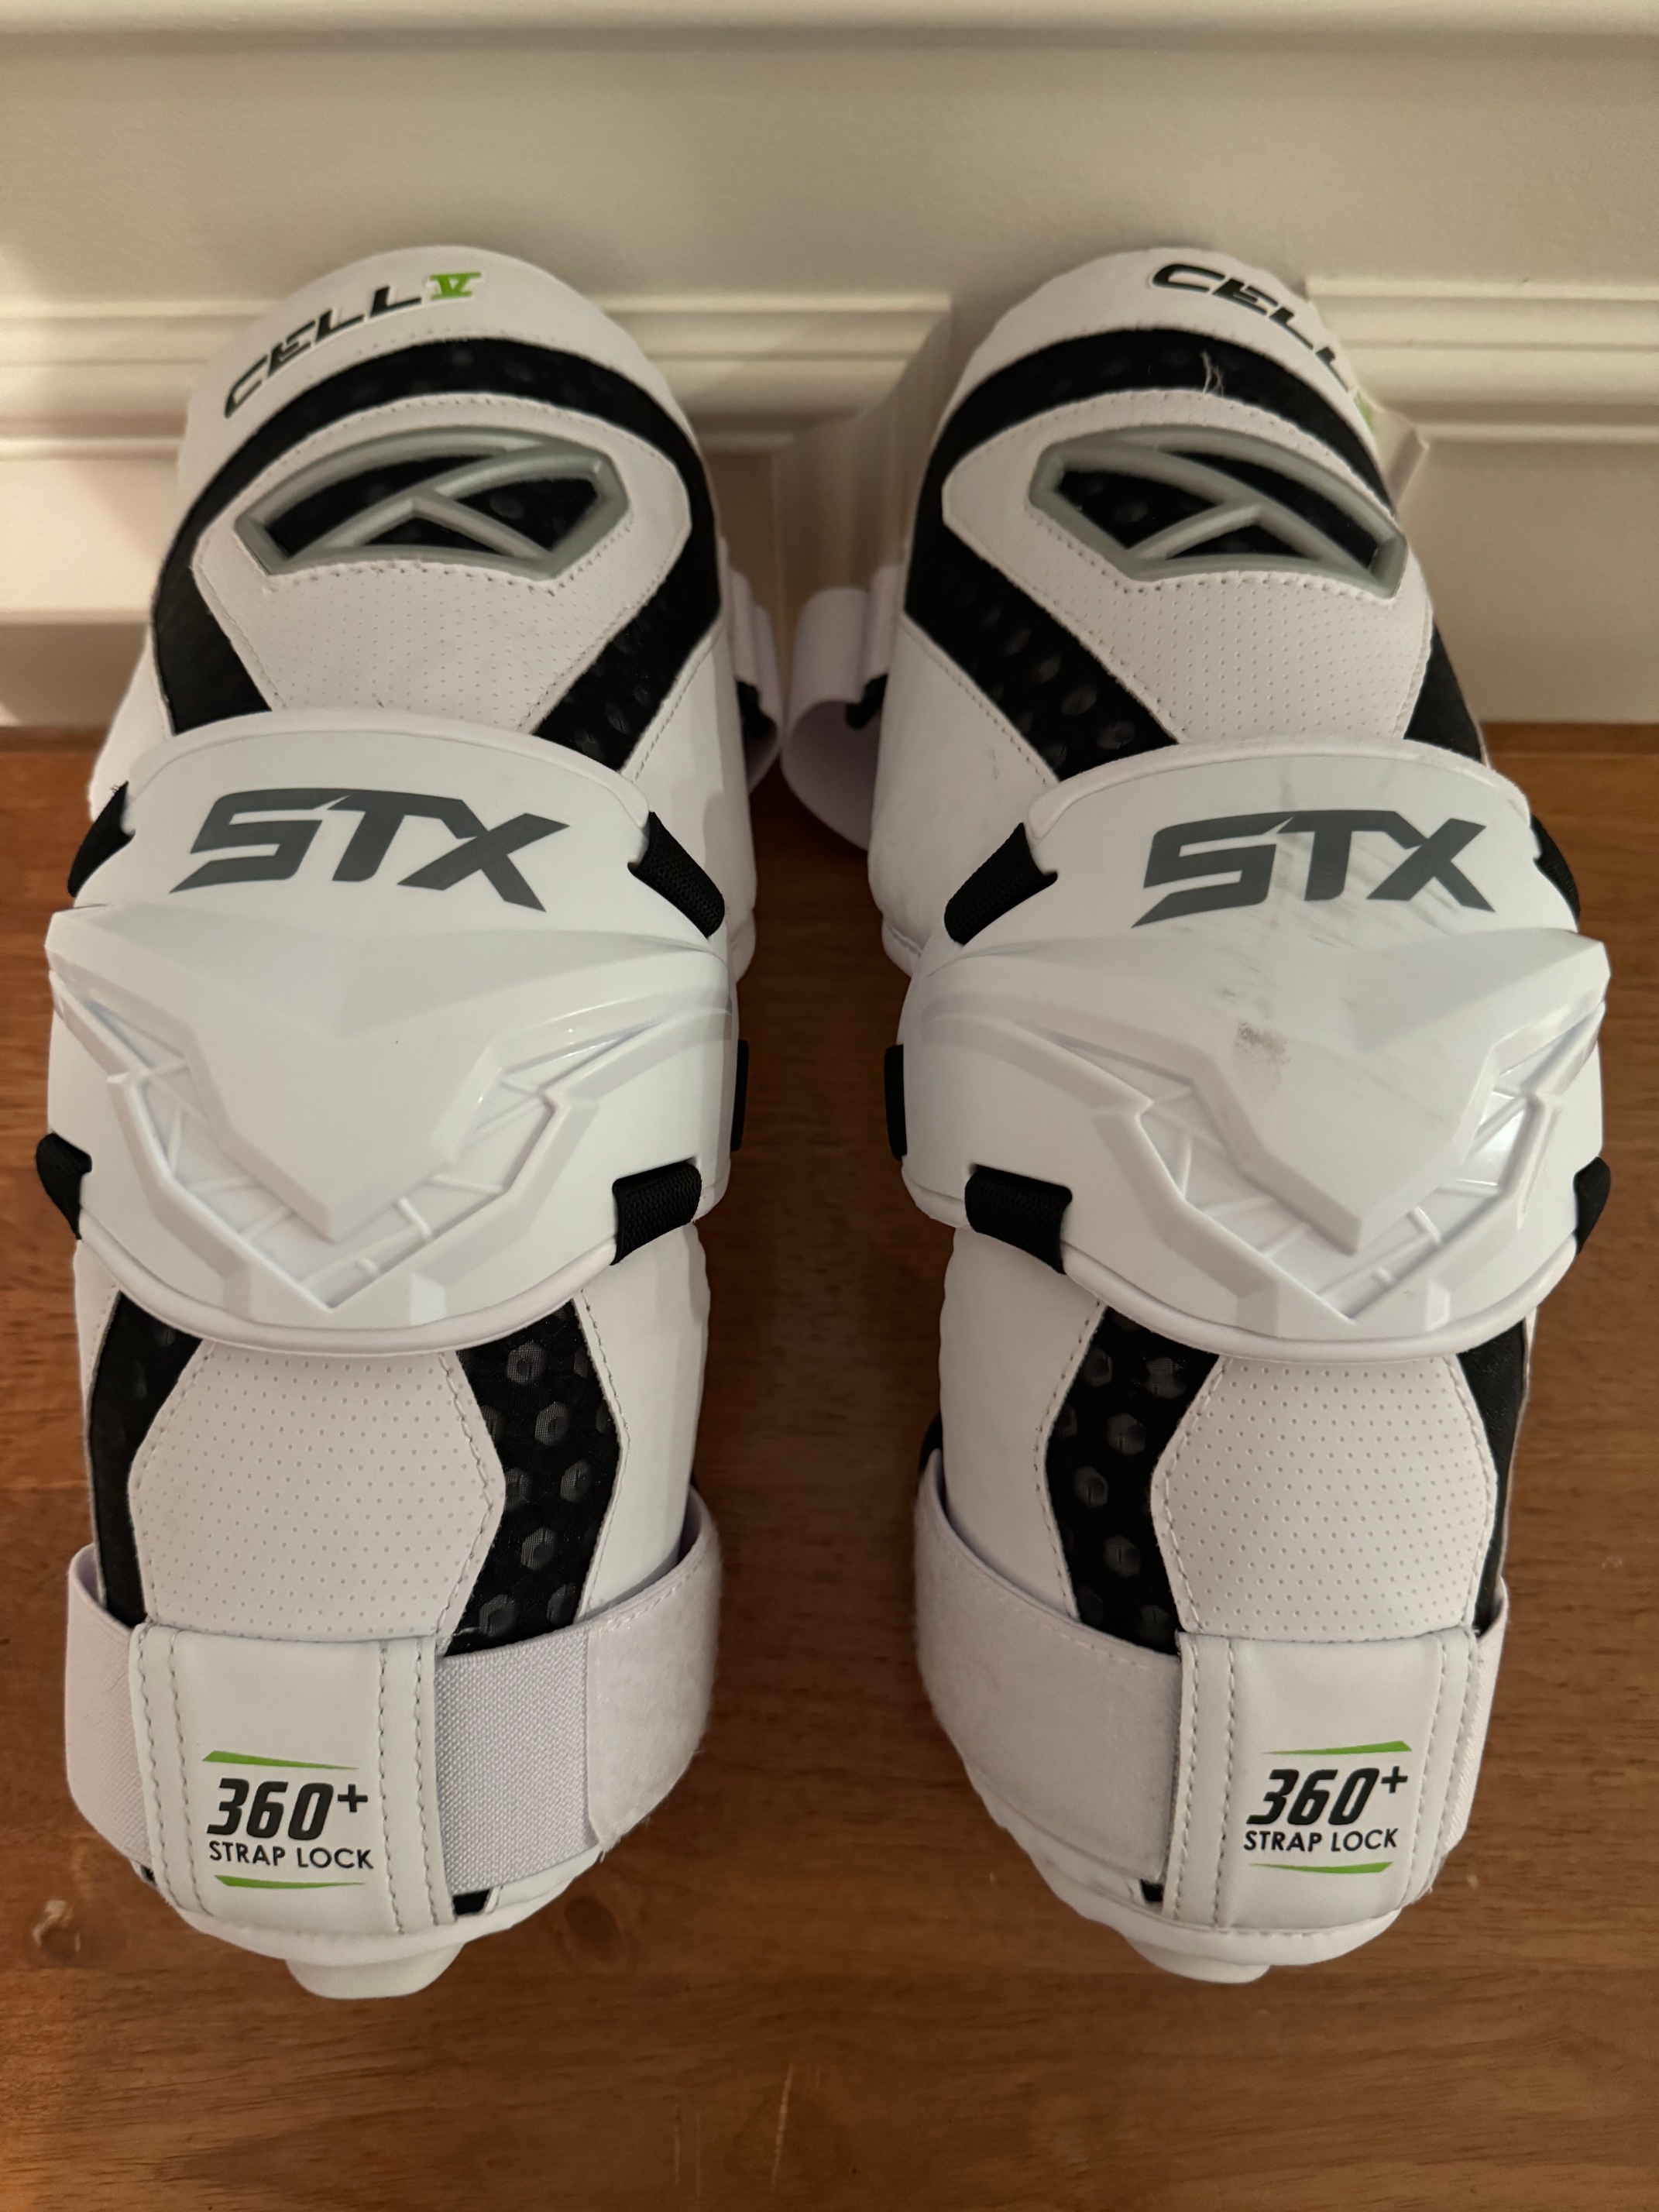 Adult Large STX Cell V Arm Pads (used ~20 times for rec LAX, Like New)